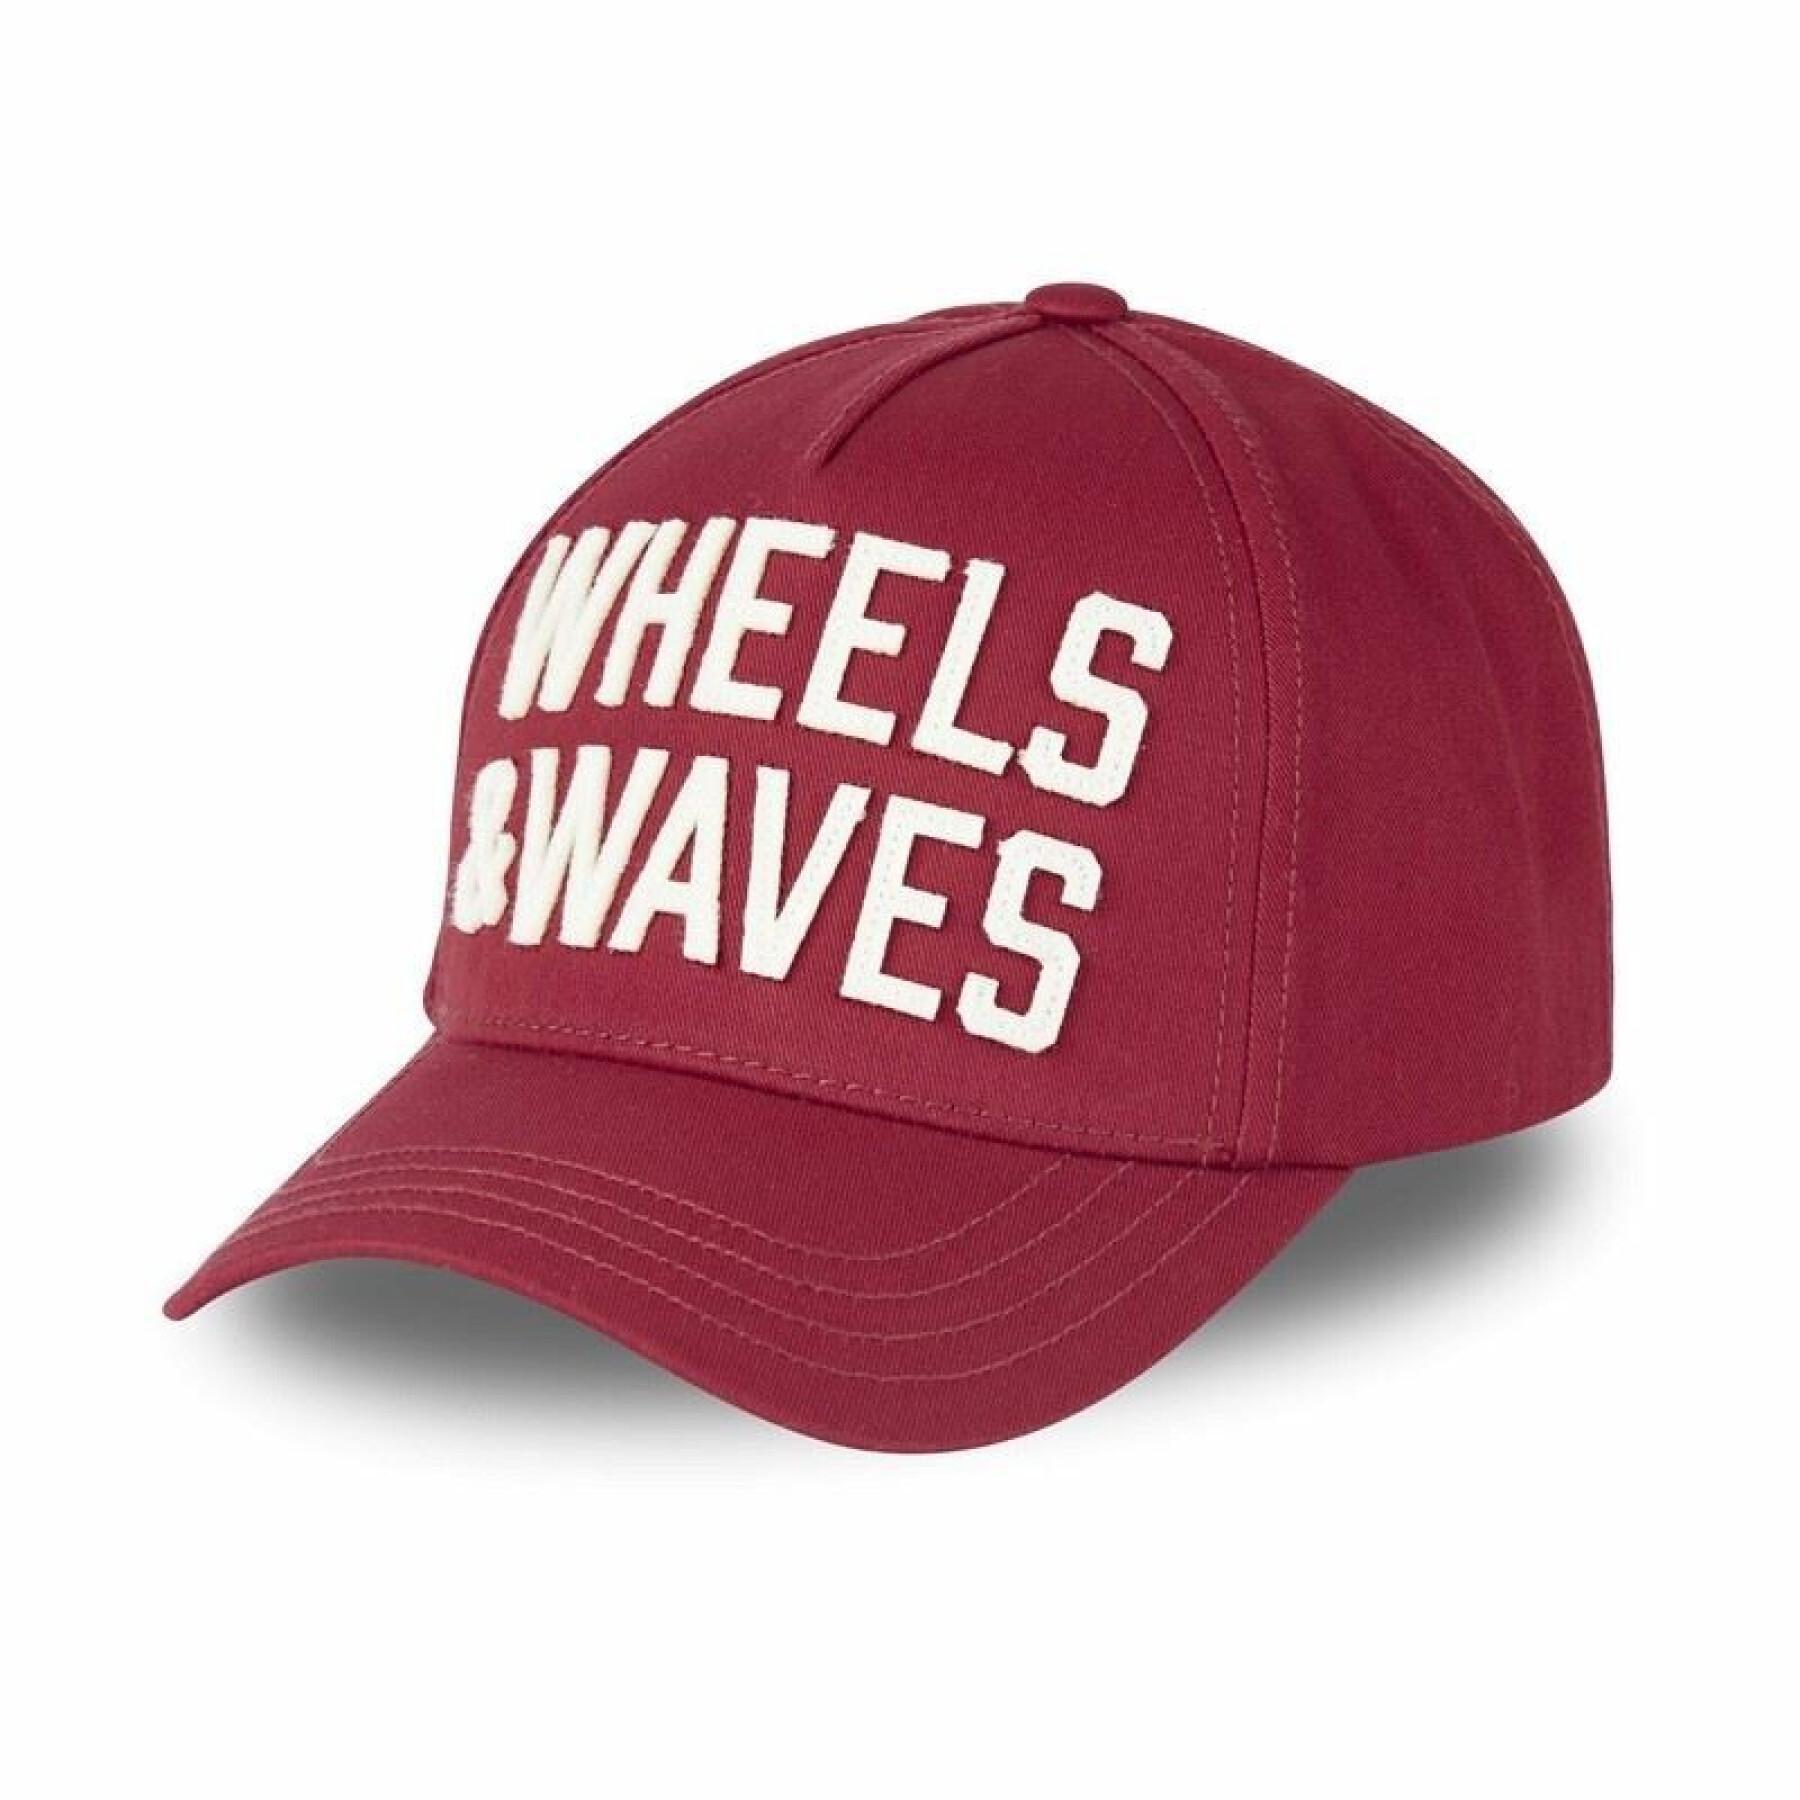 Pack of 6 caps Wheel and Waves W22B